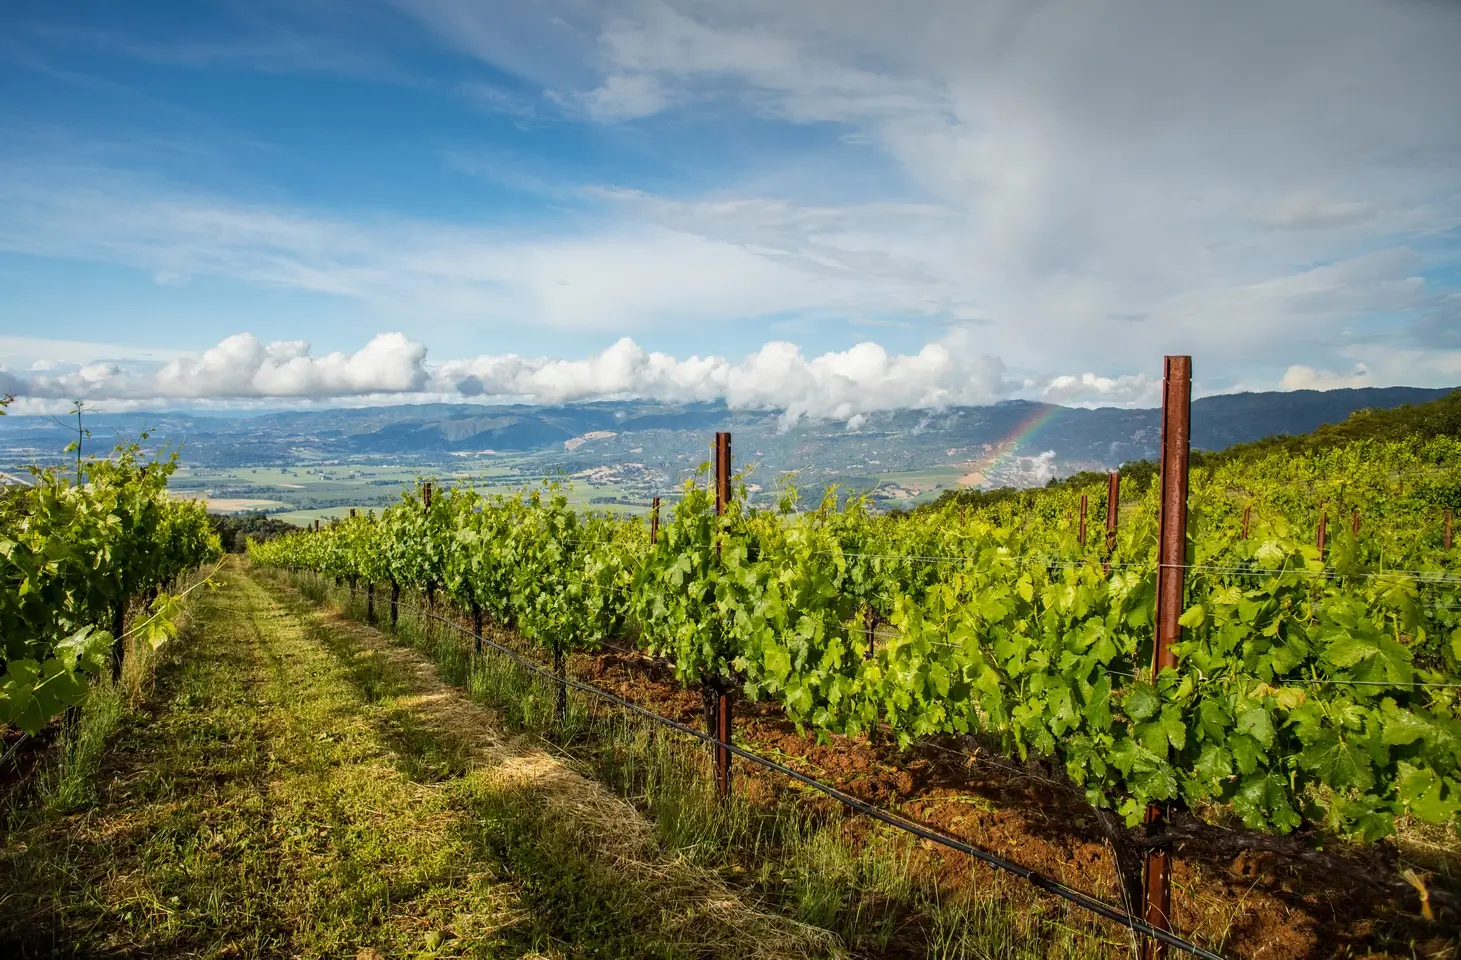 Morning scene of vineyard, with a hint of rainbow in the sky